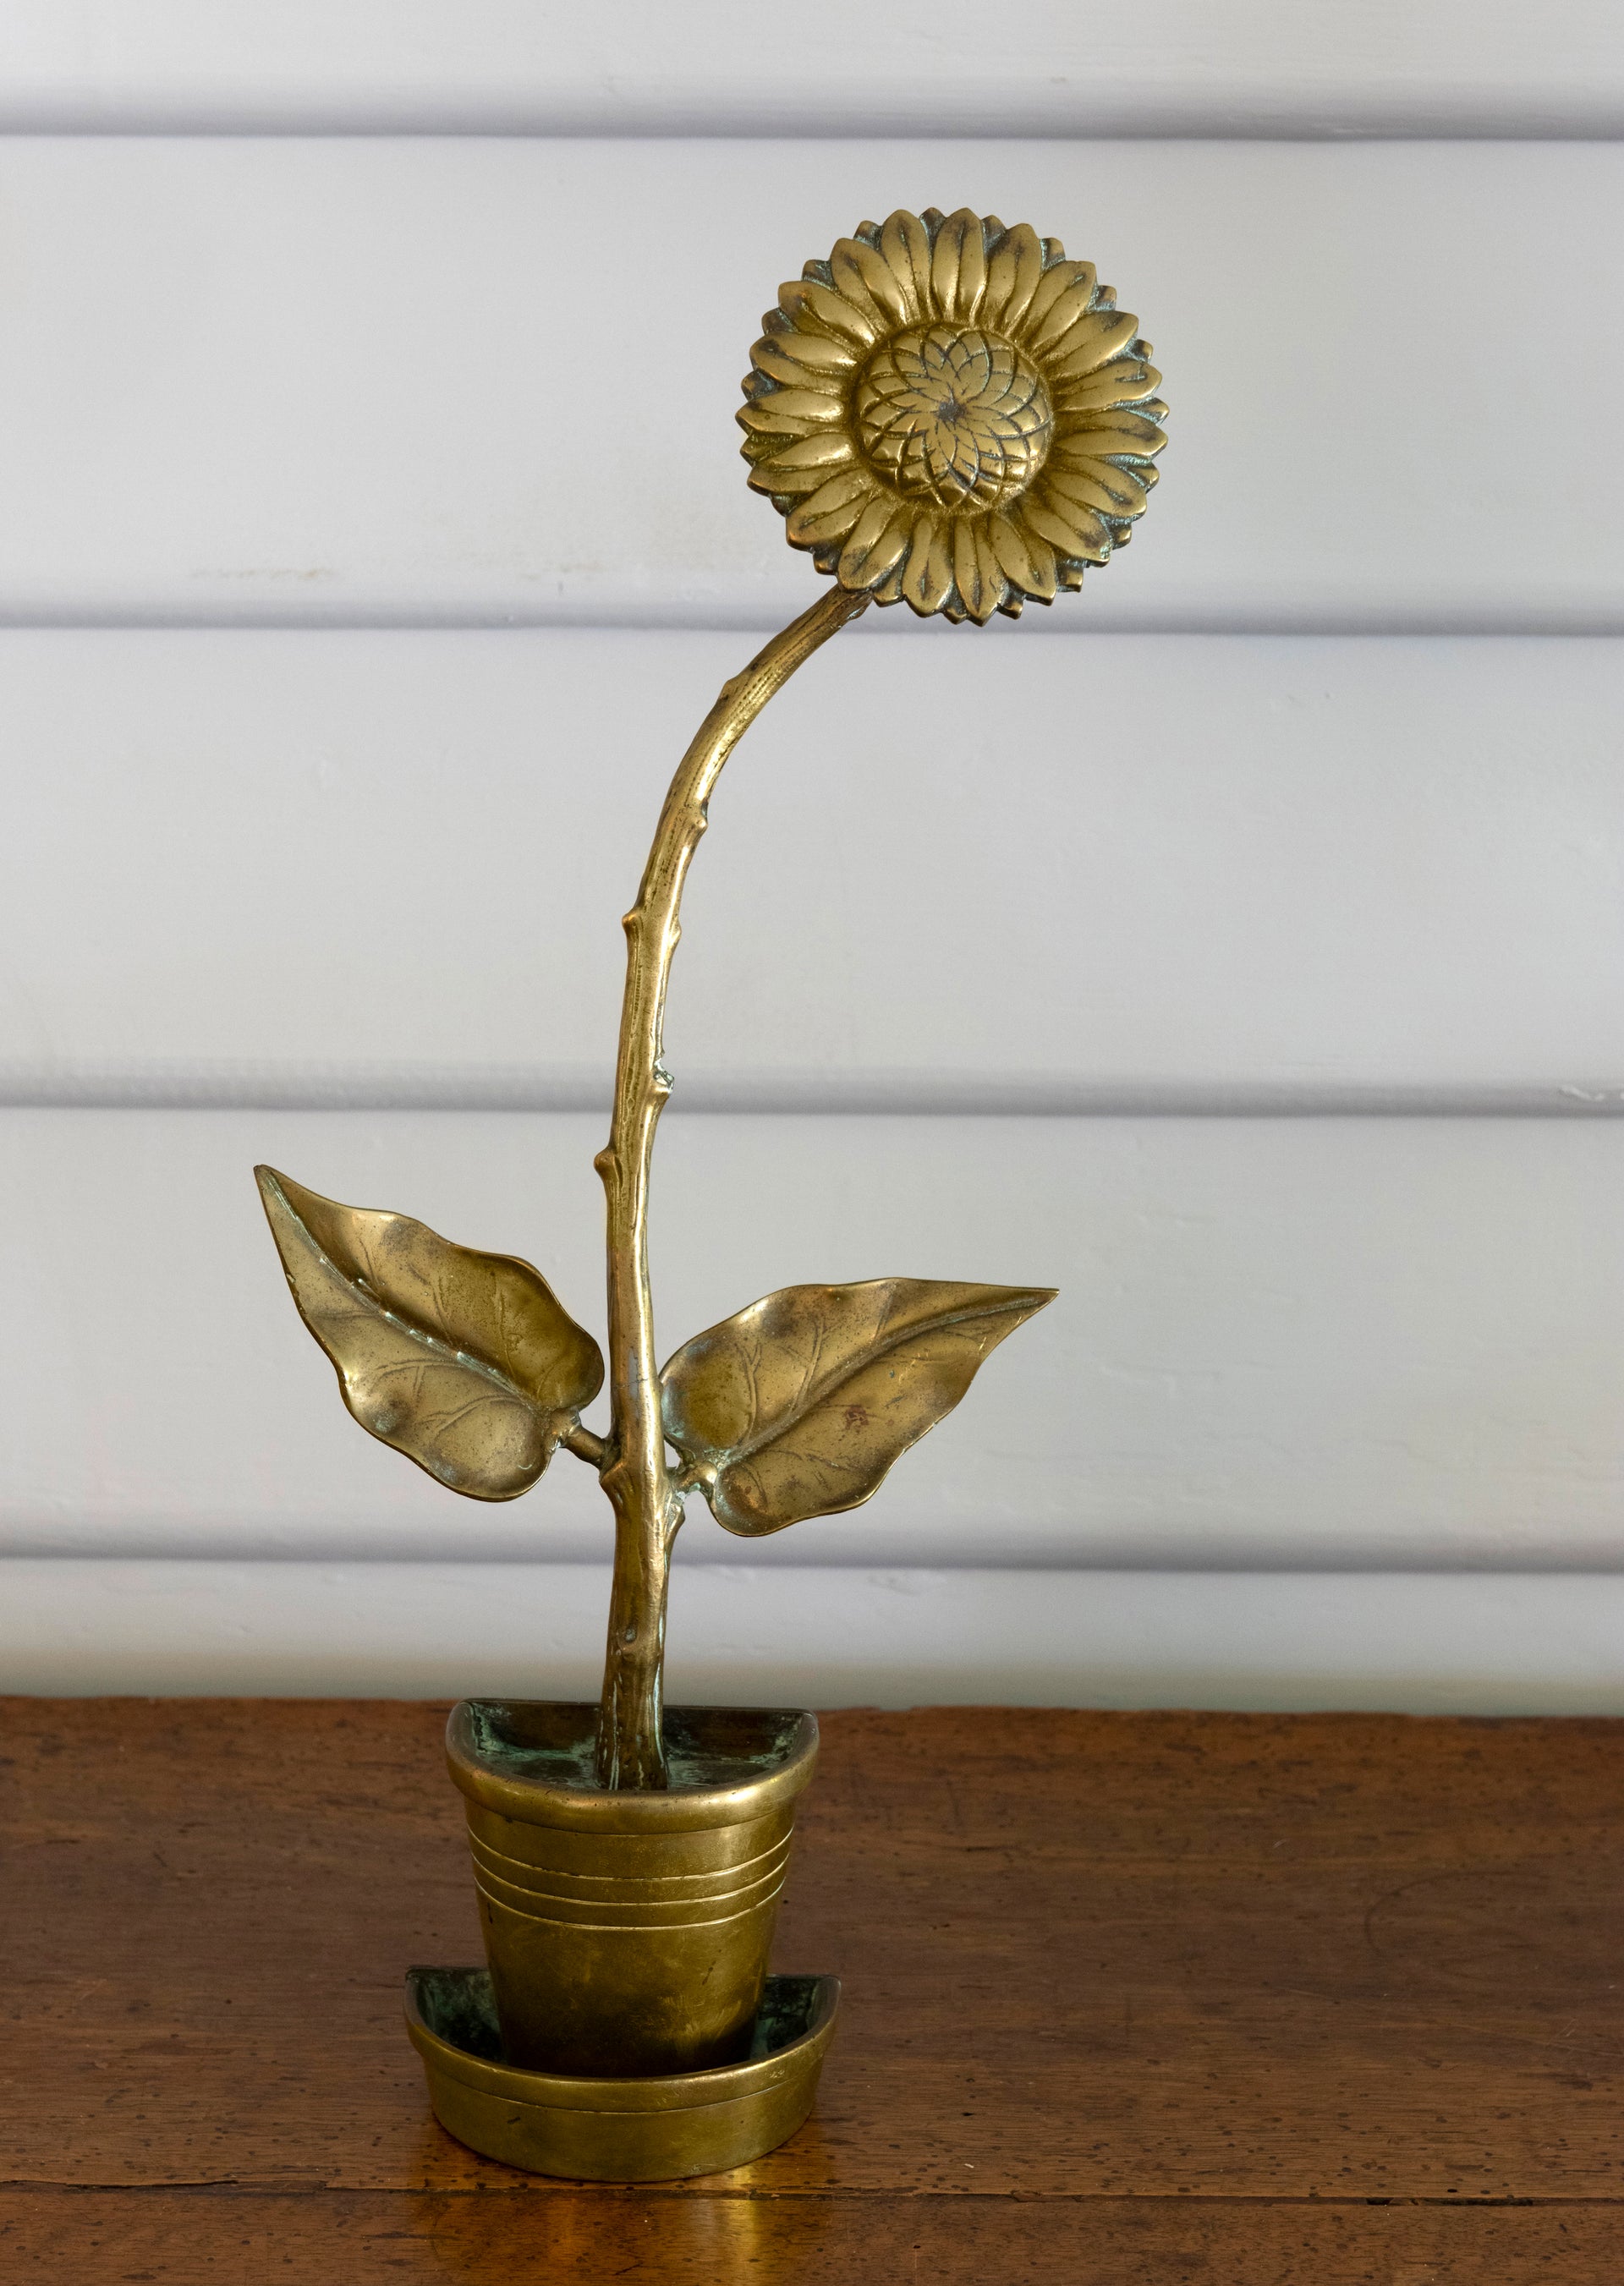 SOLD A charming French vintage brass sunflower doorstop